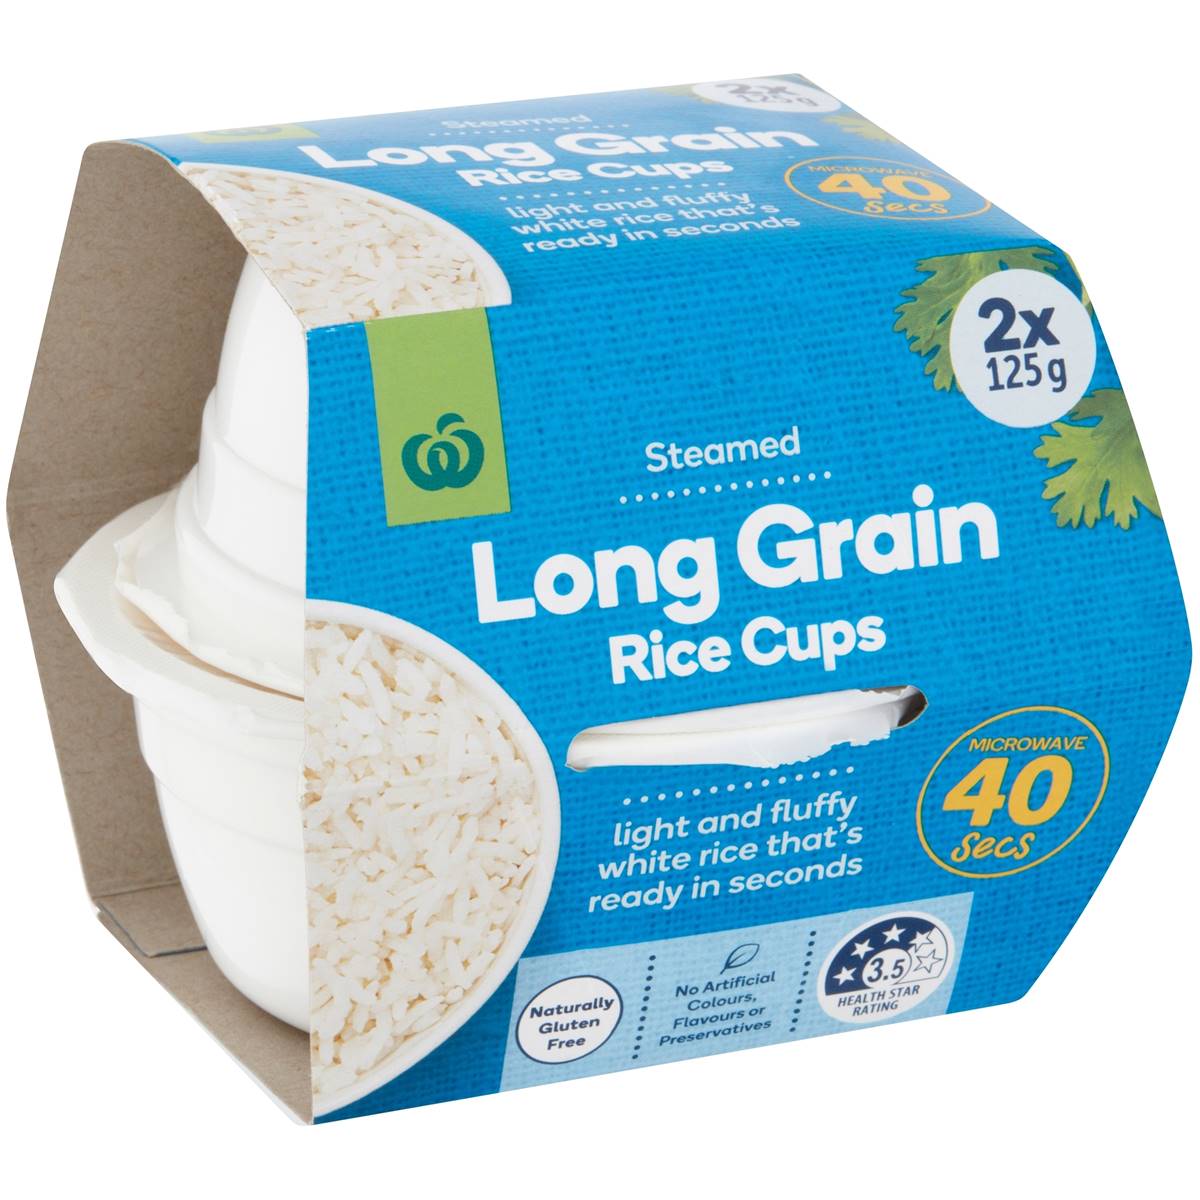 https://www.mustakshif.com/public/uploads/products/woolworths-woolworths-long-grain-rice-microwave-cups-2-pack_9300633627942_Mustakshif.jpg